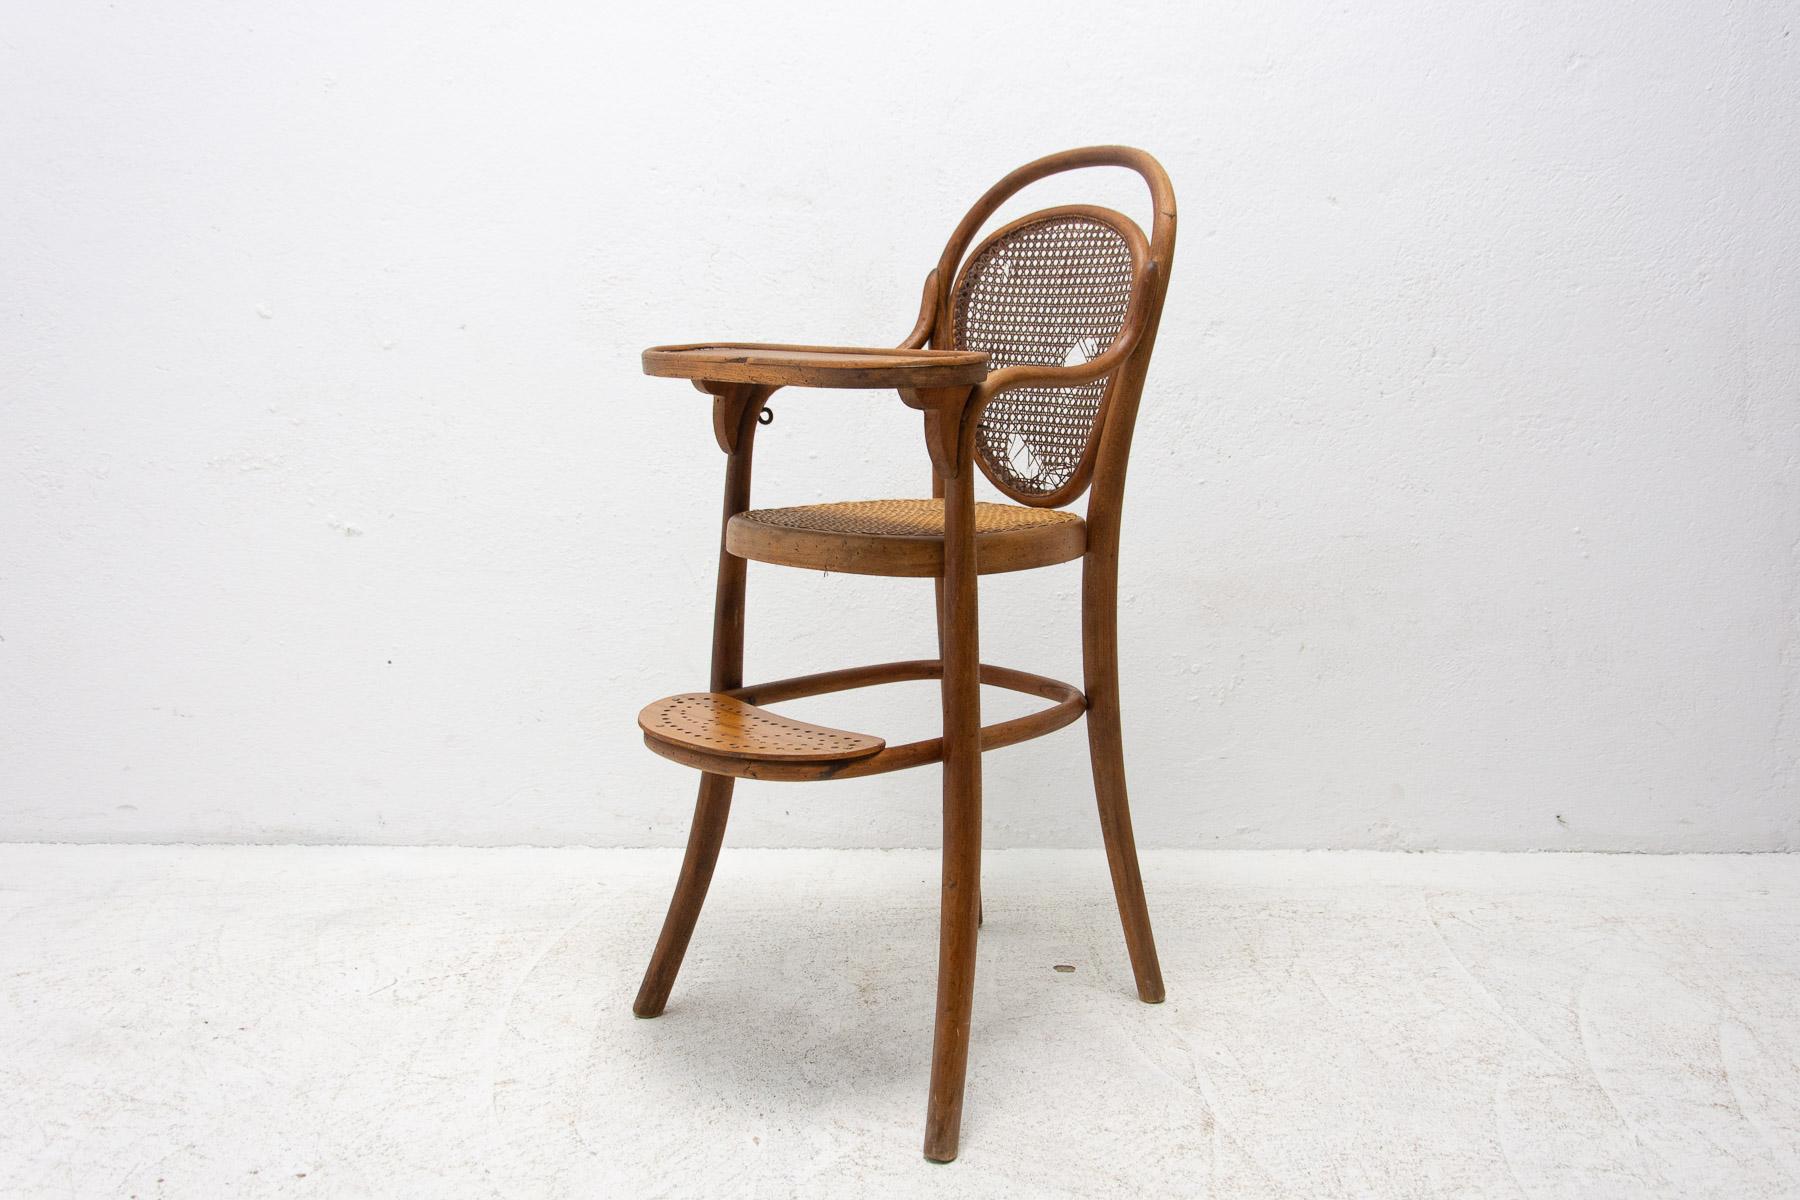 Original antique Children’s chair by Gebruder Thonet .

It was made in Wien – Austria. Produced between 1885 – 1915.
Children’s chair number 1 in the catalogue. Bent beechwood in combination with rattan.
The backrest is damaged.
Overall in good